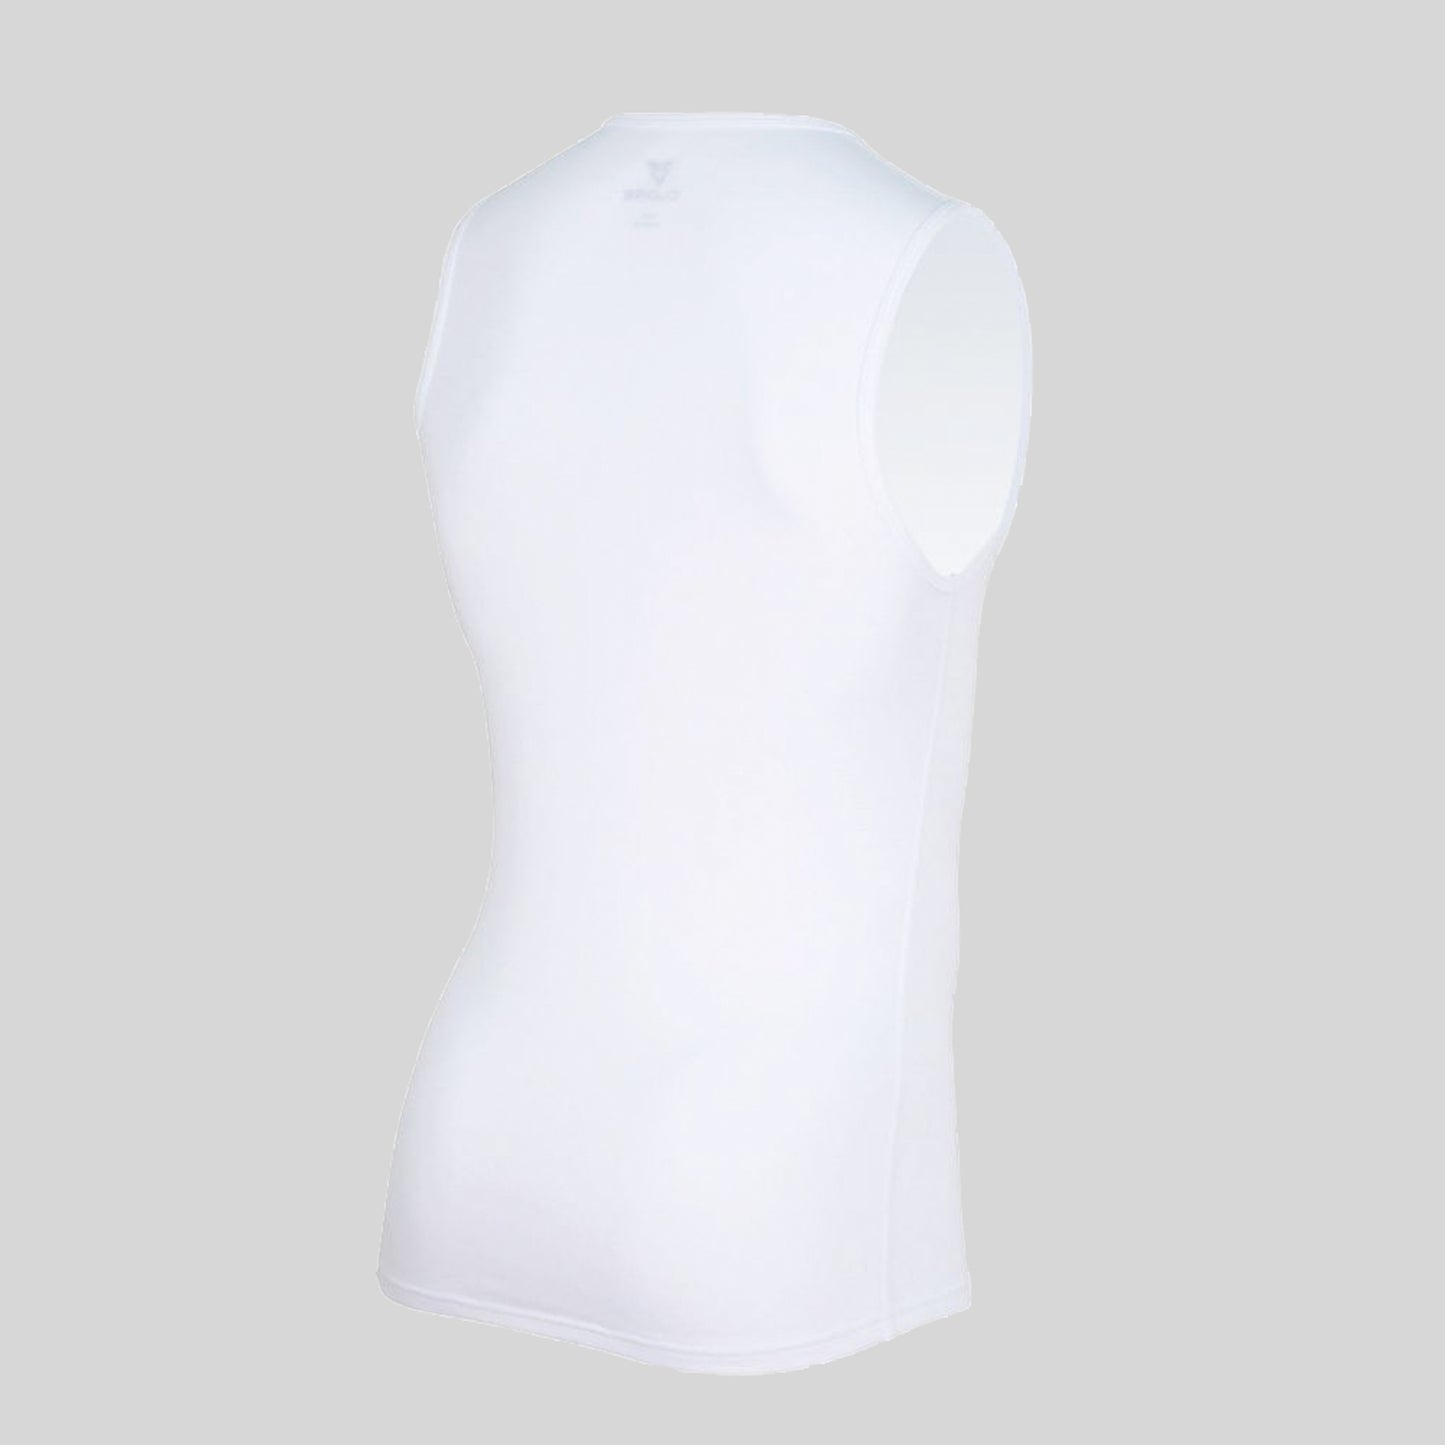 Sleeveless Baselayer White by Cuore of Switzerland for Ascender Cycling Club Zürich Switzerland Back View